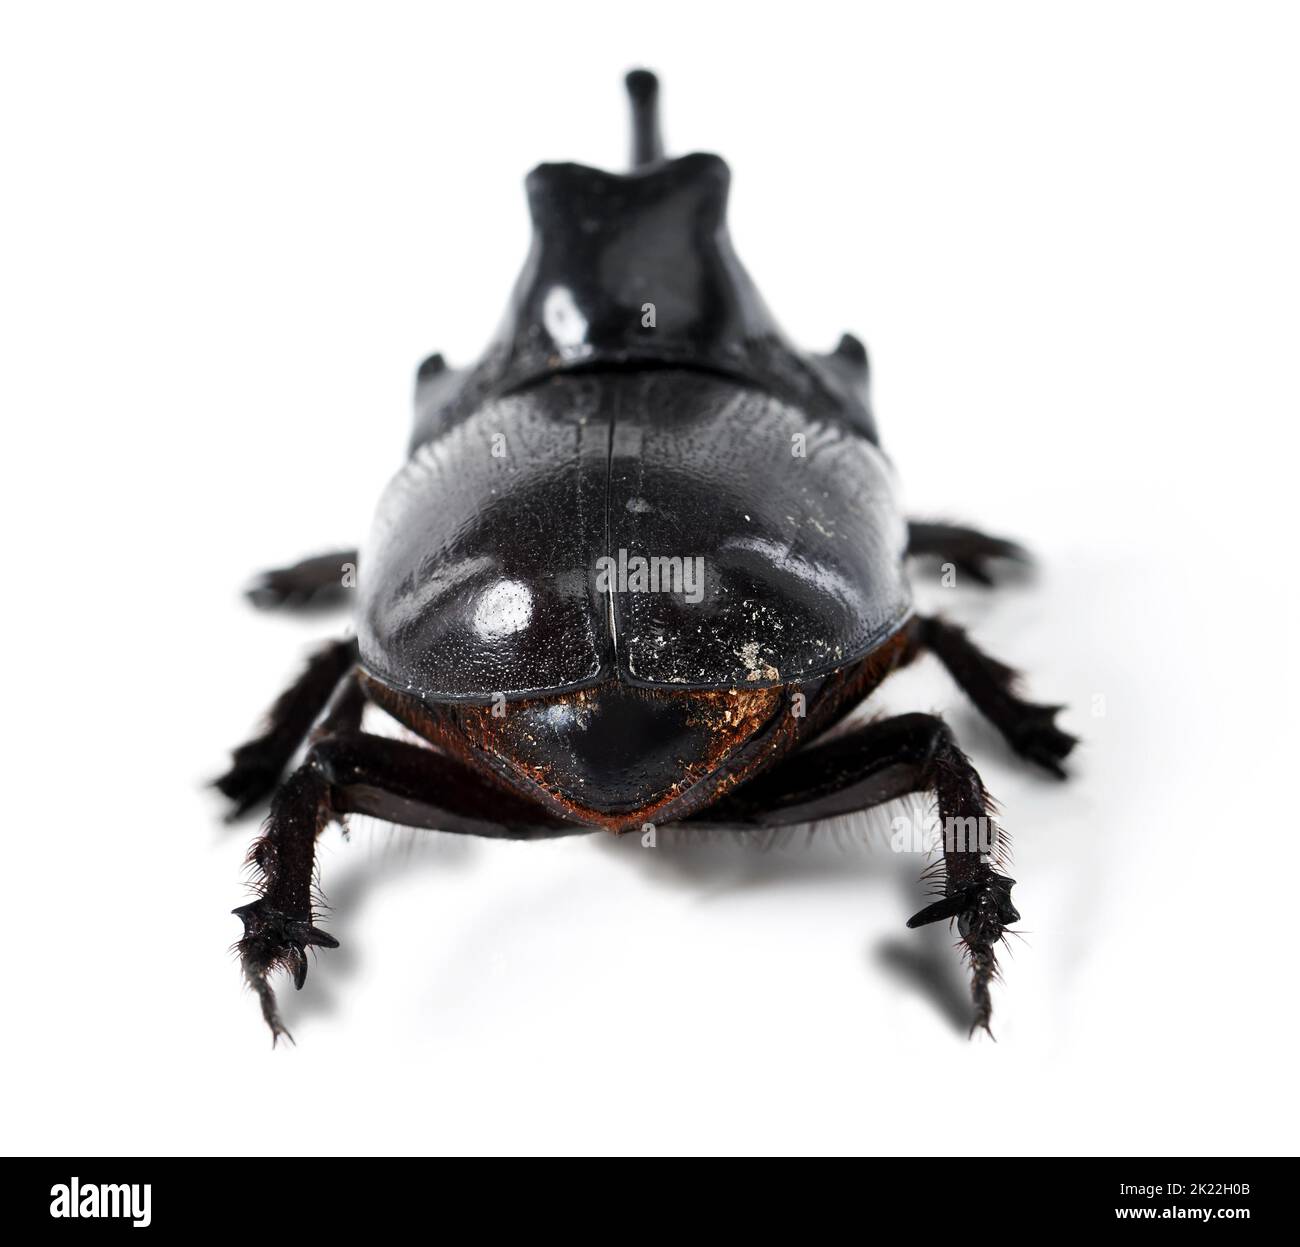 The toughest beetle around. Closeup side view of a rhinoceros beetle. Stock Photo